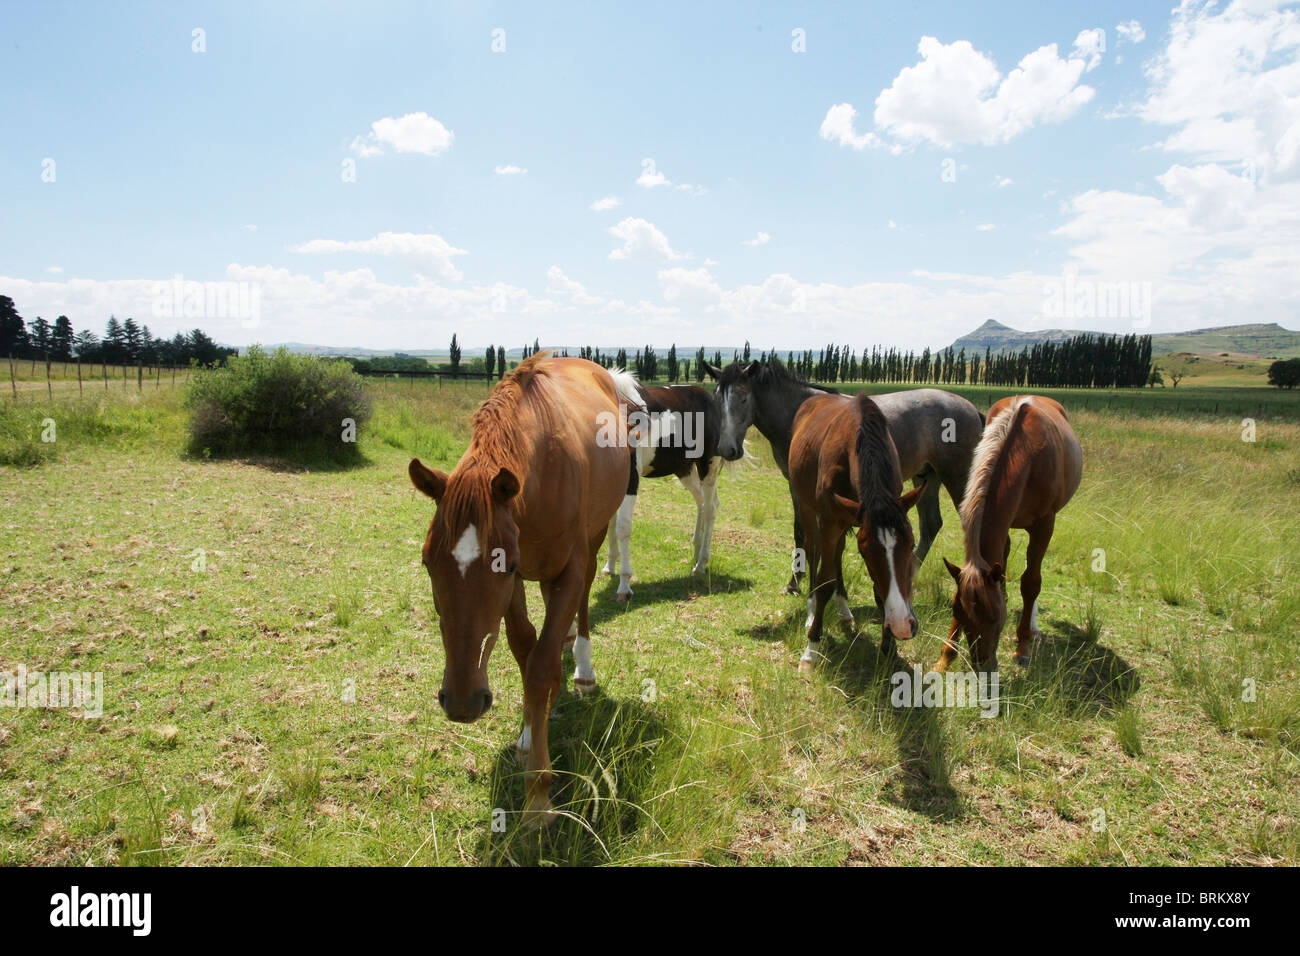 Young horses grazing in a field Stock Photo